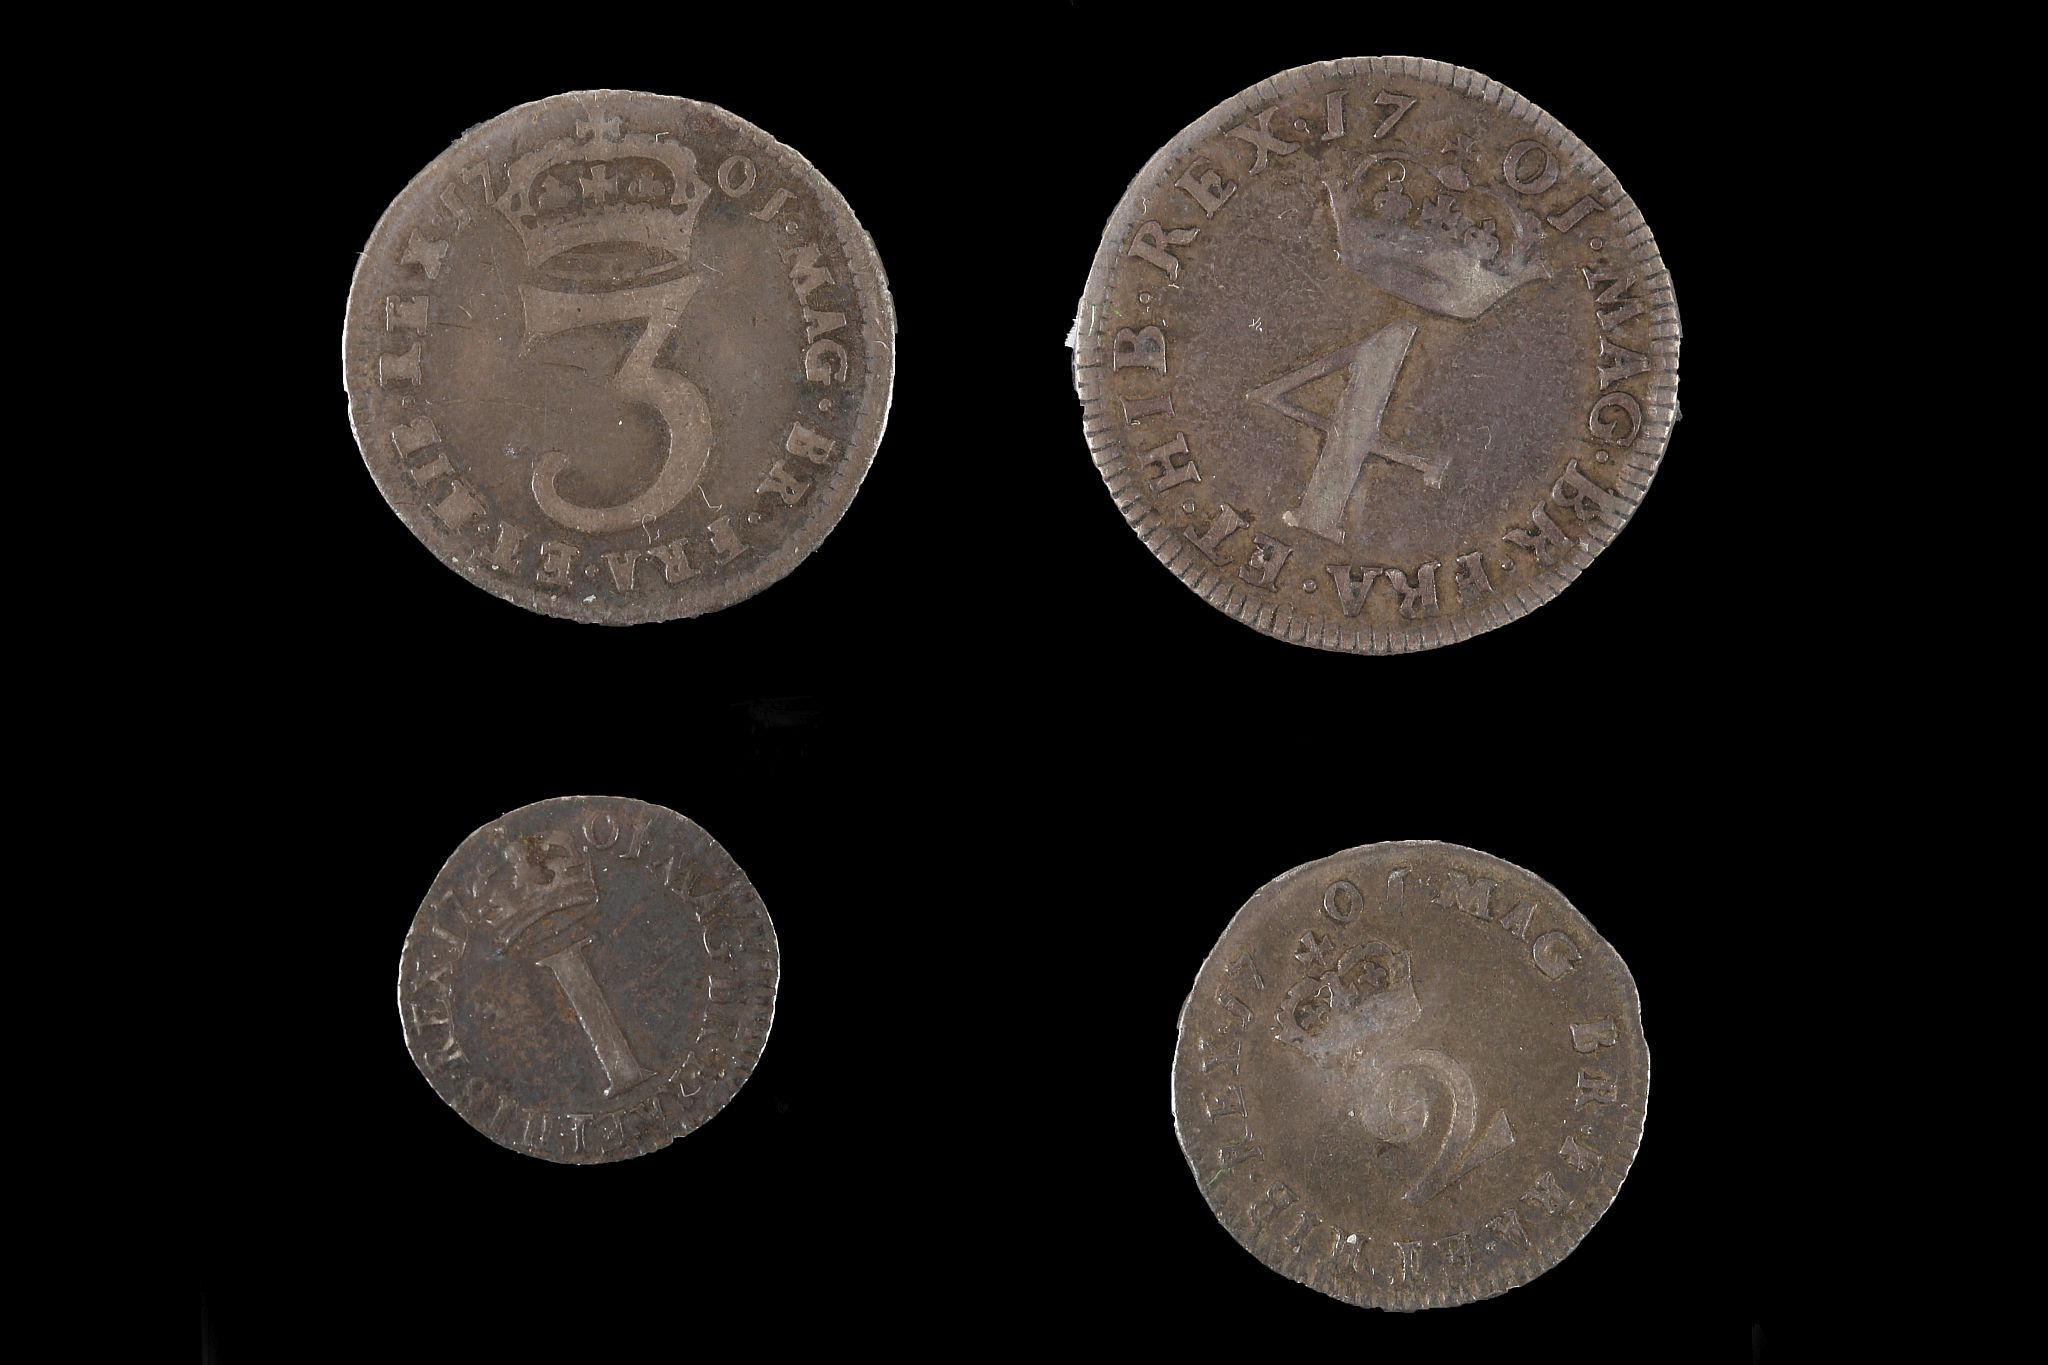 William III 1701, maundy set of four coins, laureate bust right / values in crowned Arabic numerals,